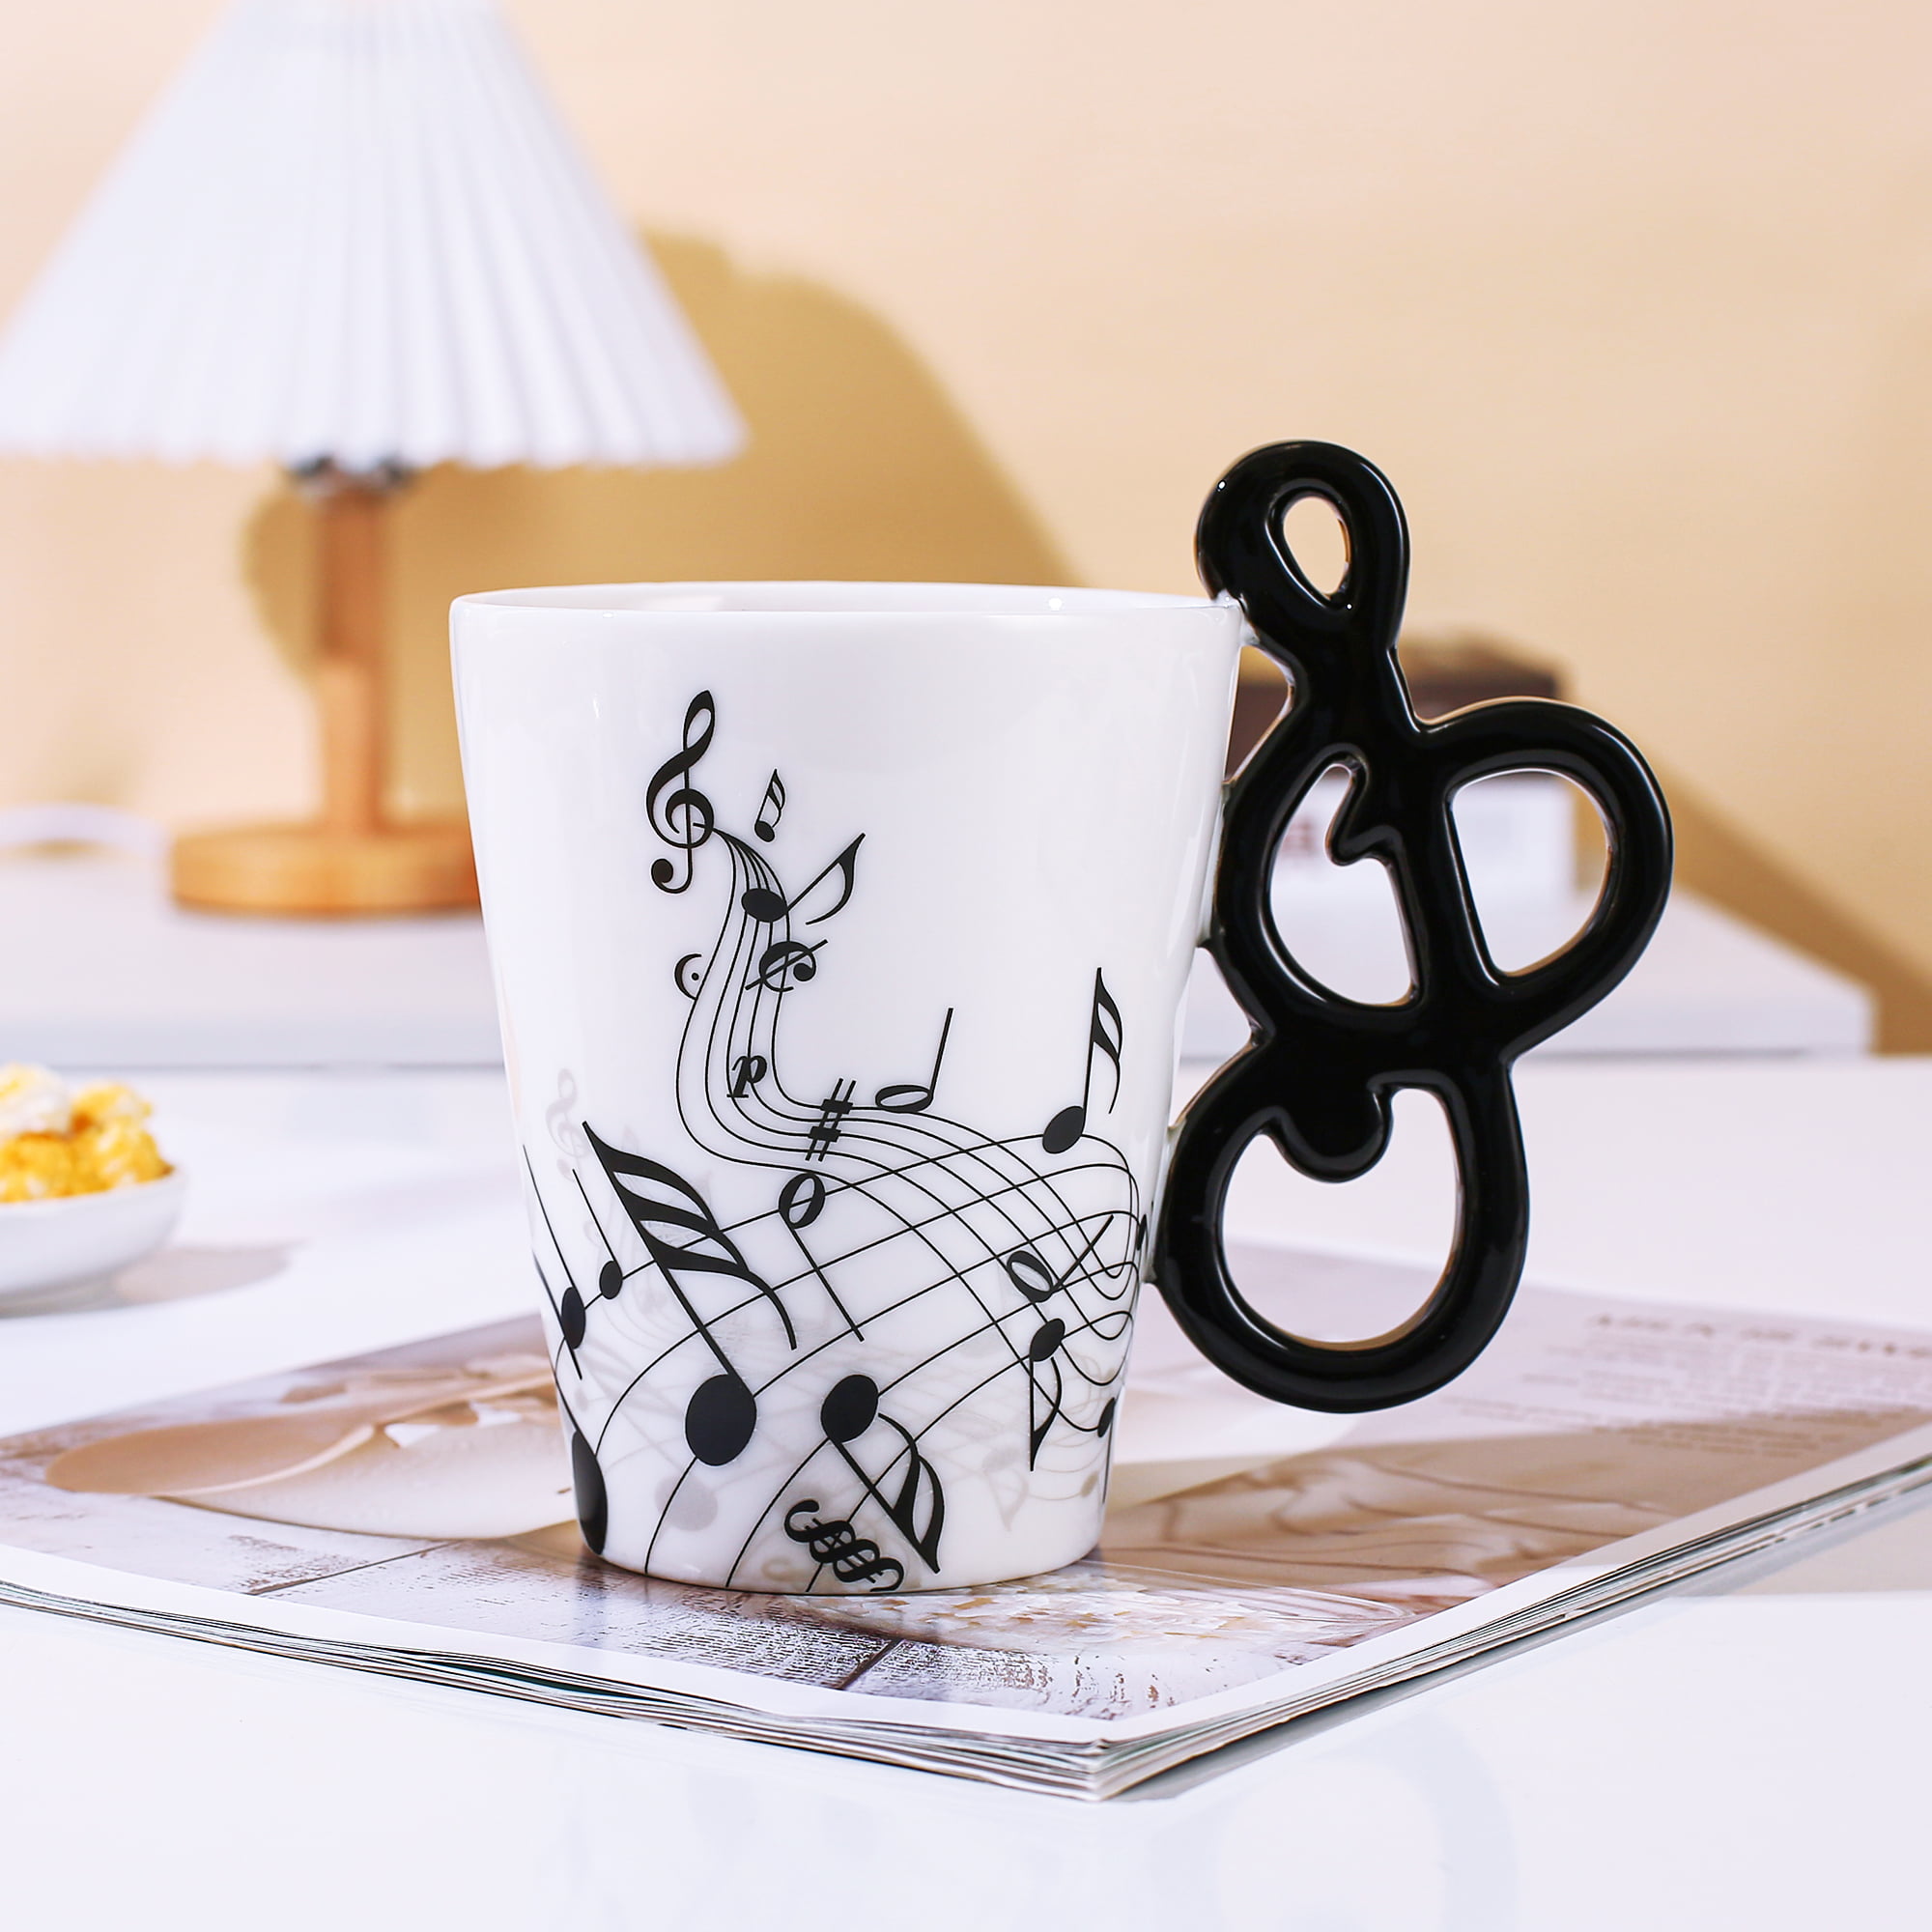 12.9 oz Unique 3D Handle Music Mug Musical Notes Design Coffee Cup Ceramic  Music Musical Notes Cup Gift for Women,Men,Friend